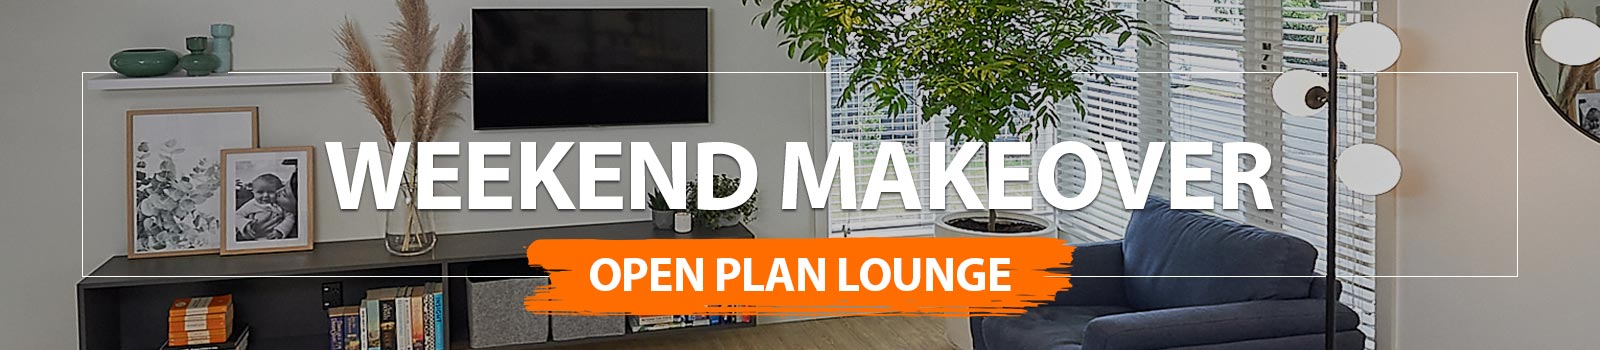 Weekend Makeover - Open Plan Lounge